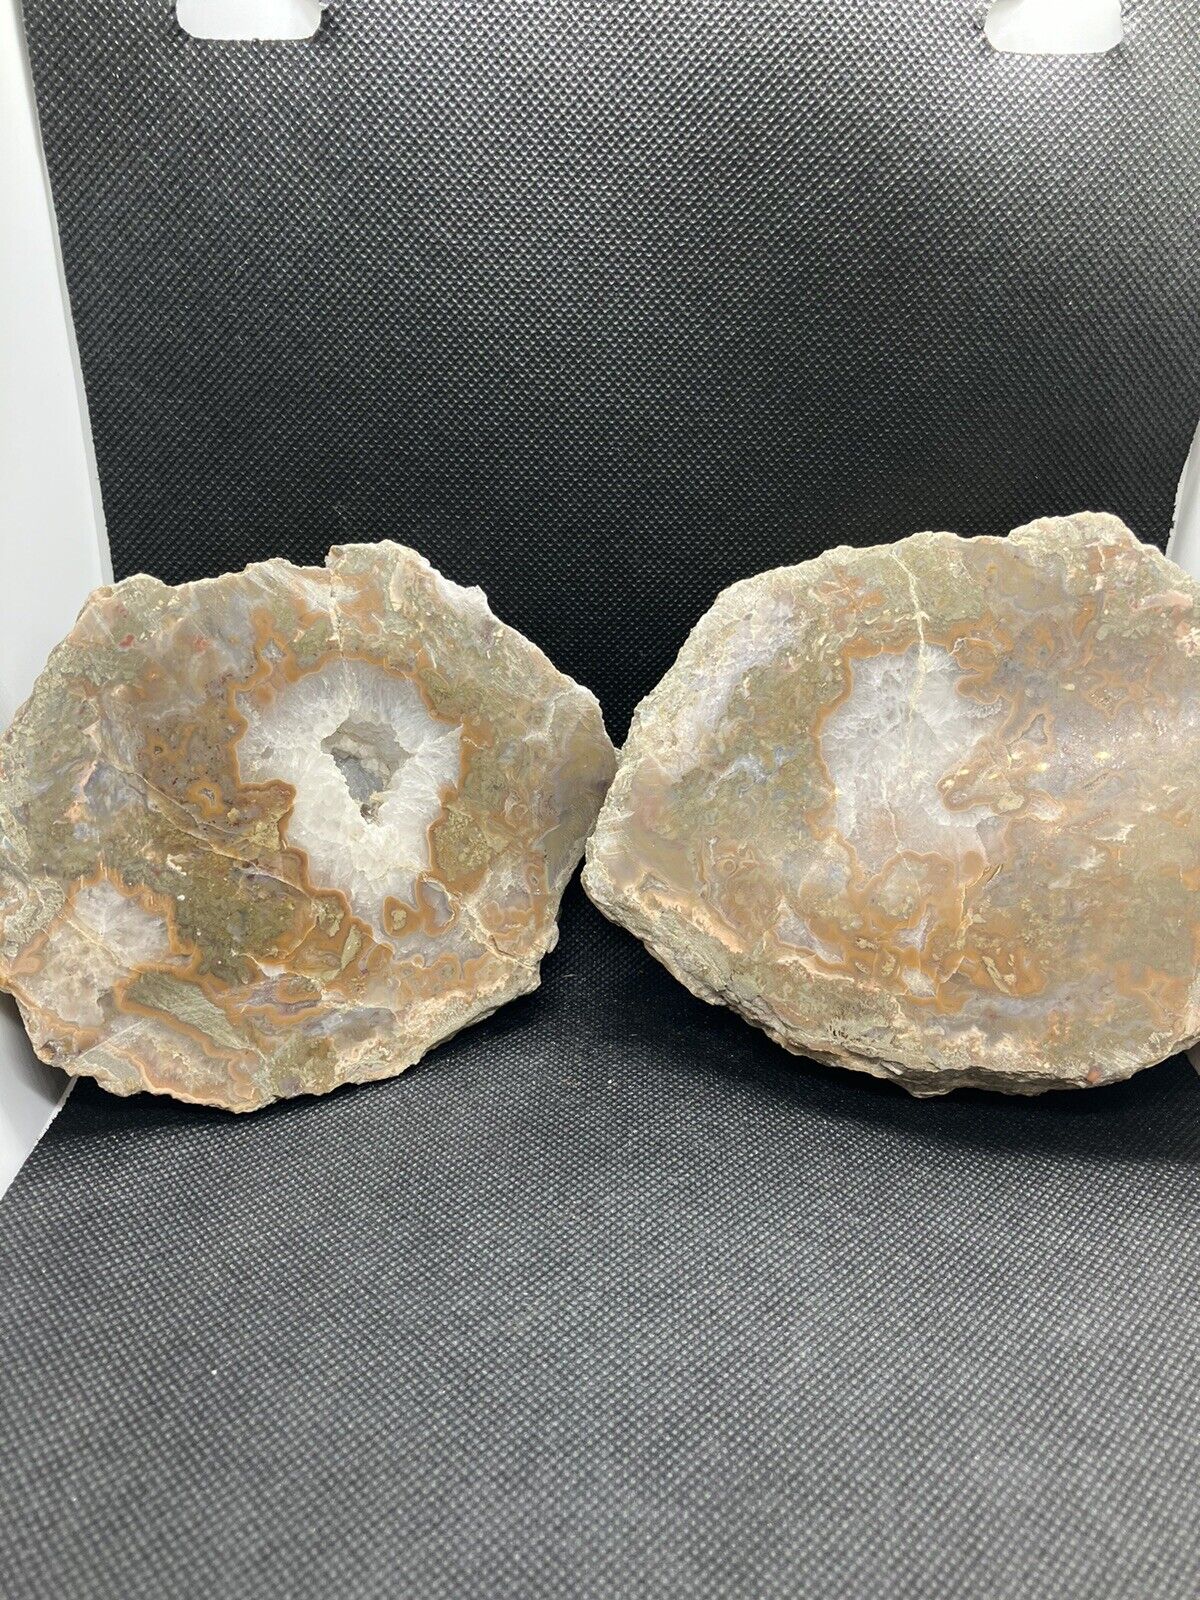 Large   KENTUCKY Agate Display  Cut And Polished